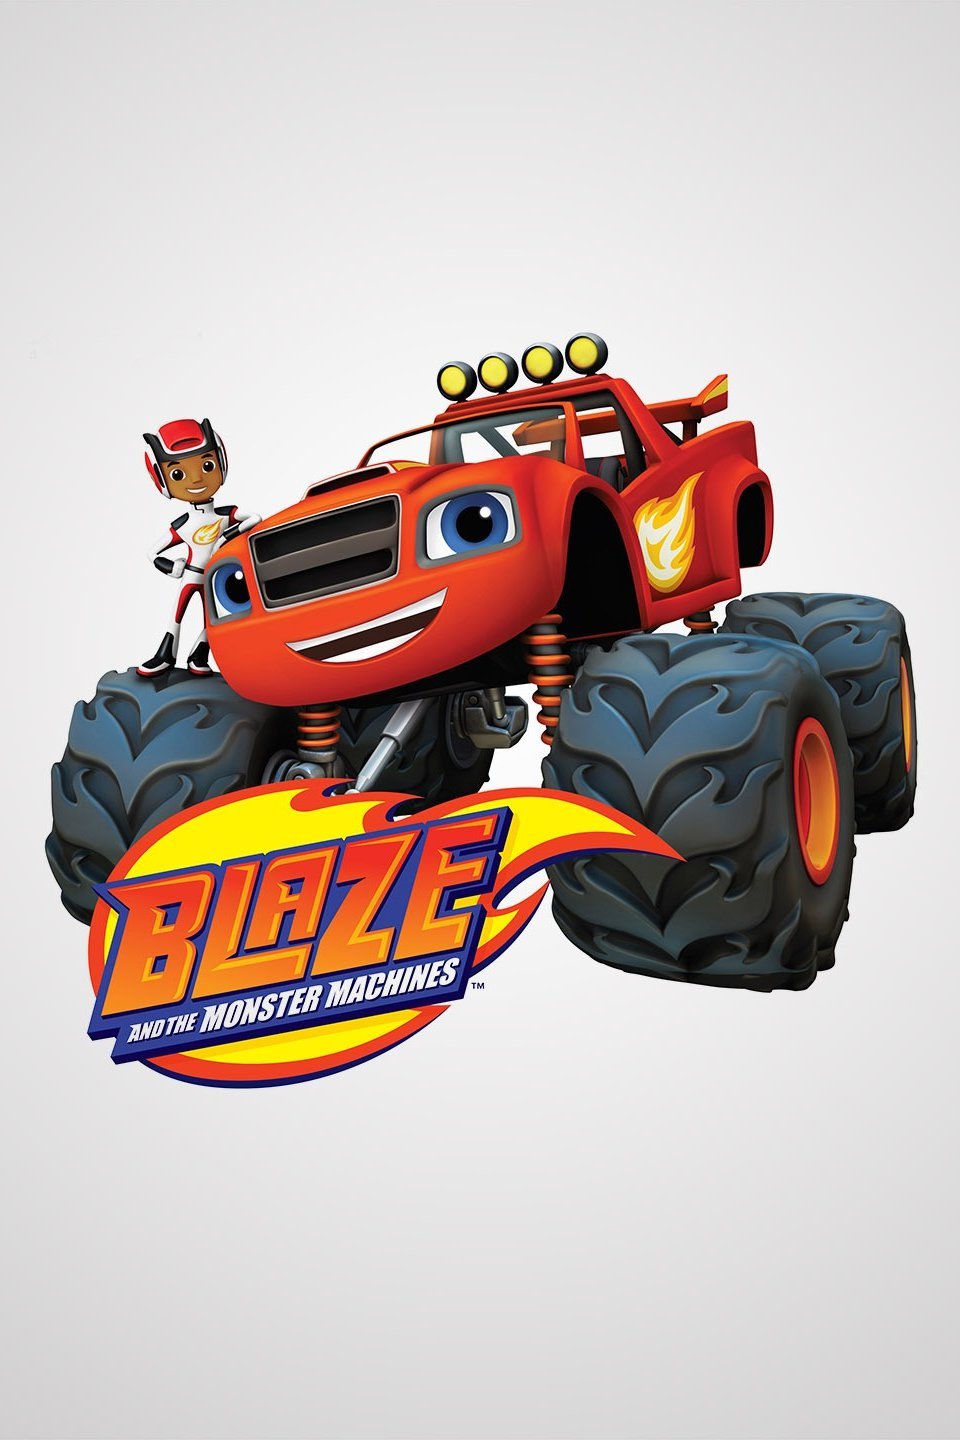 Blaze and the Monster Machines subtitles, 0 Available subtitles